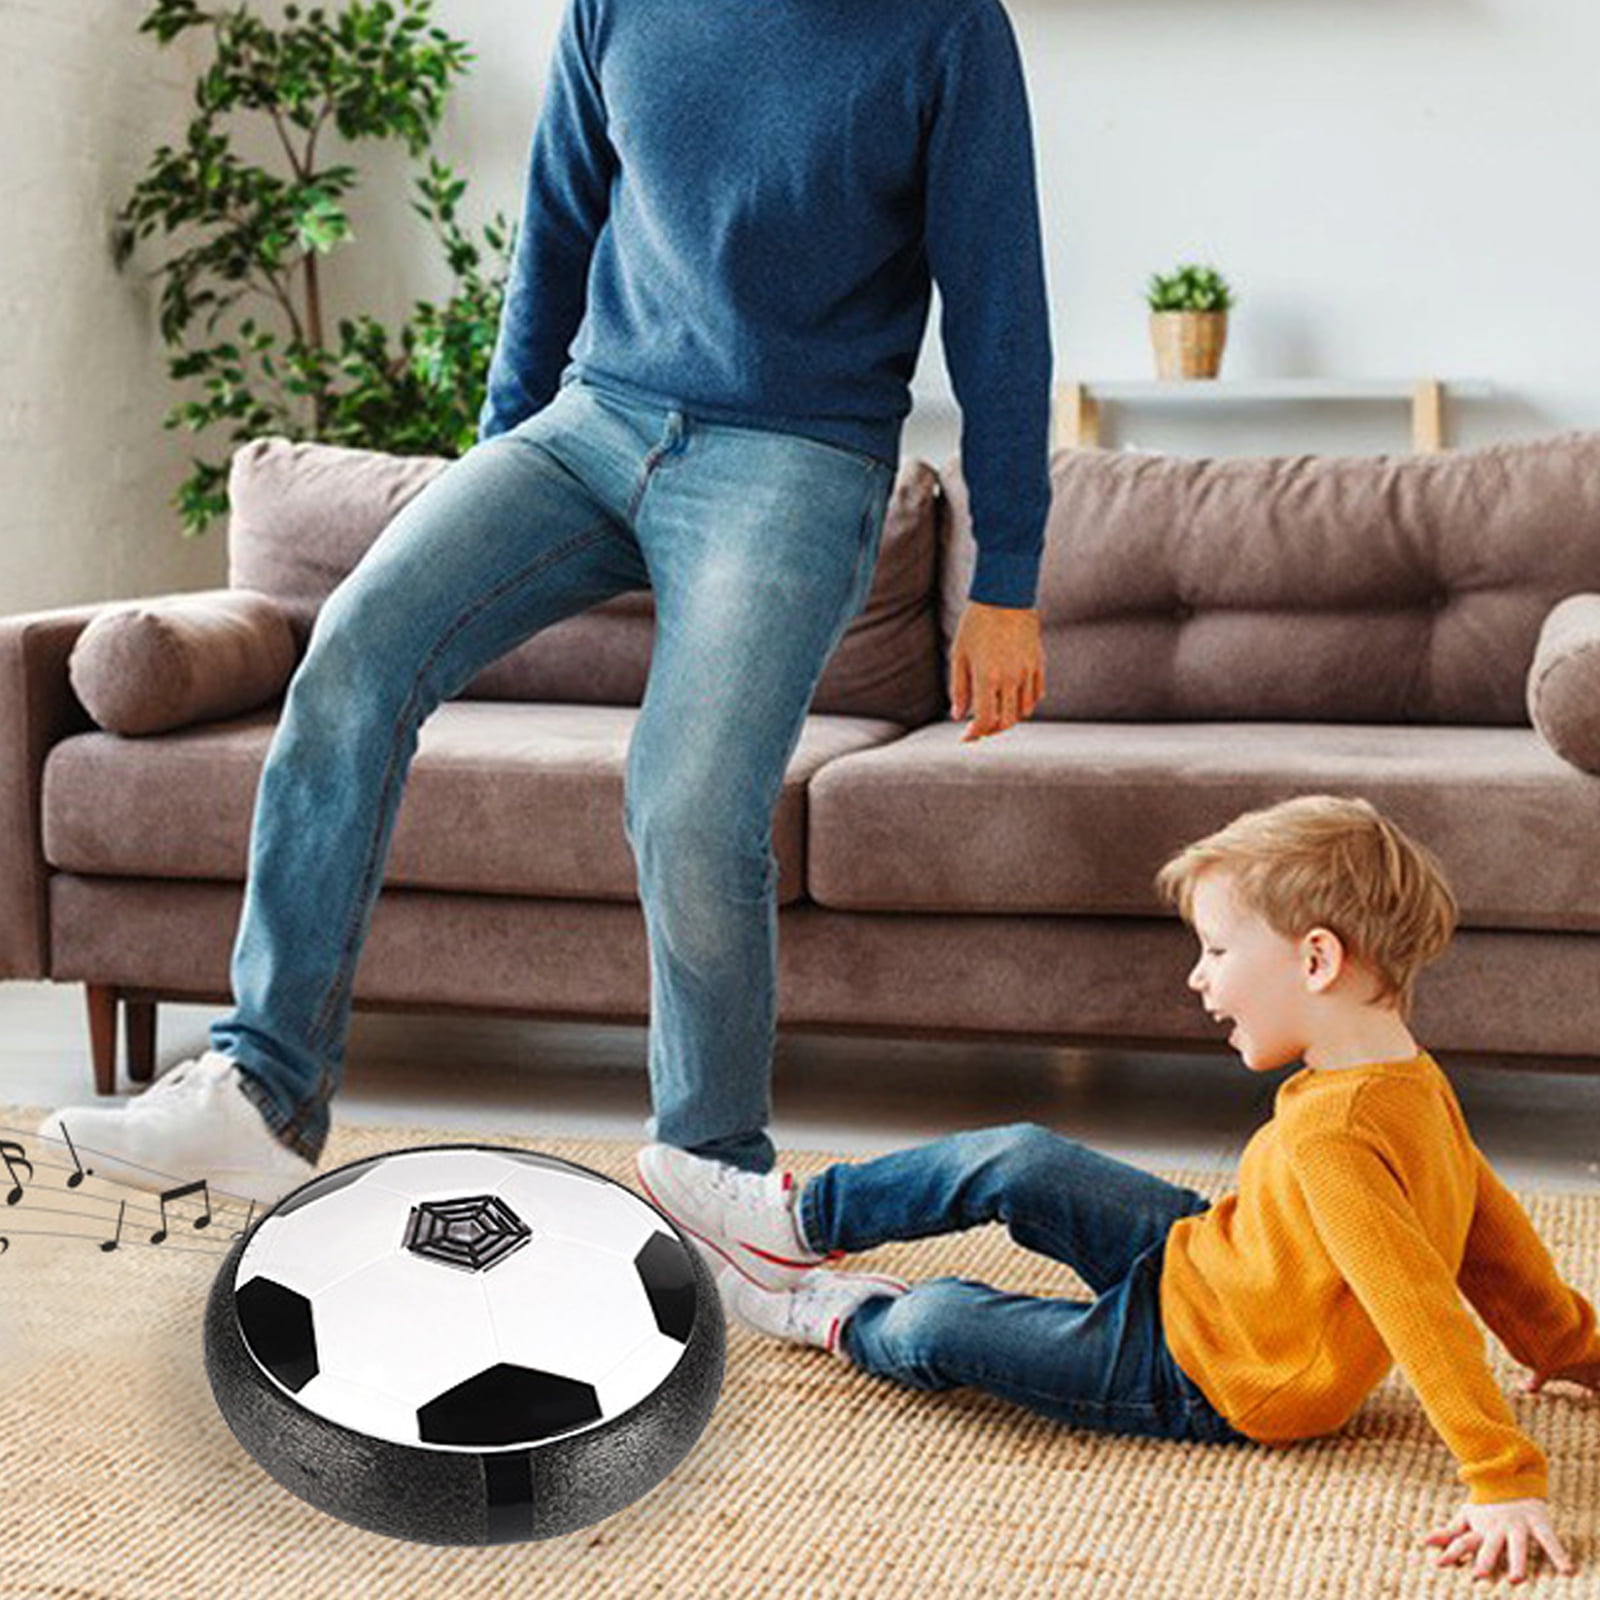  Hover Soccer Ball Christmas Stocking Stuffers for Kids Toys  Rechargeable Floating Football Set with 2 Goal Soccer LED Light Foam Bumper  Christmas Toys for Boys Girls Indoor Outdoor Sport Games 